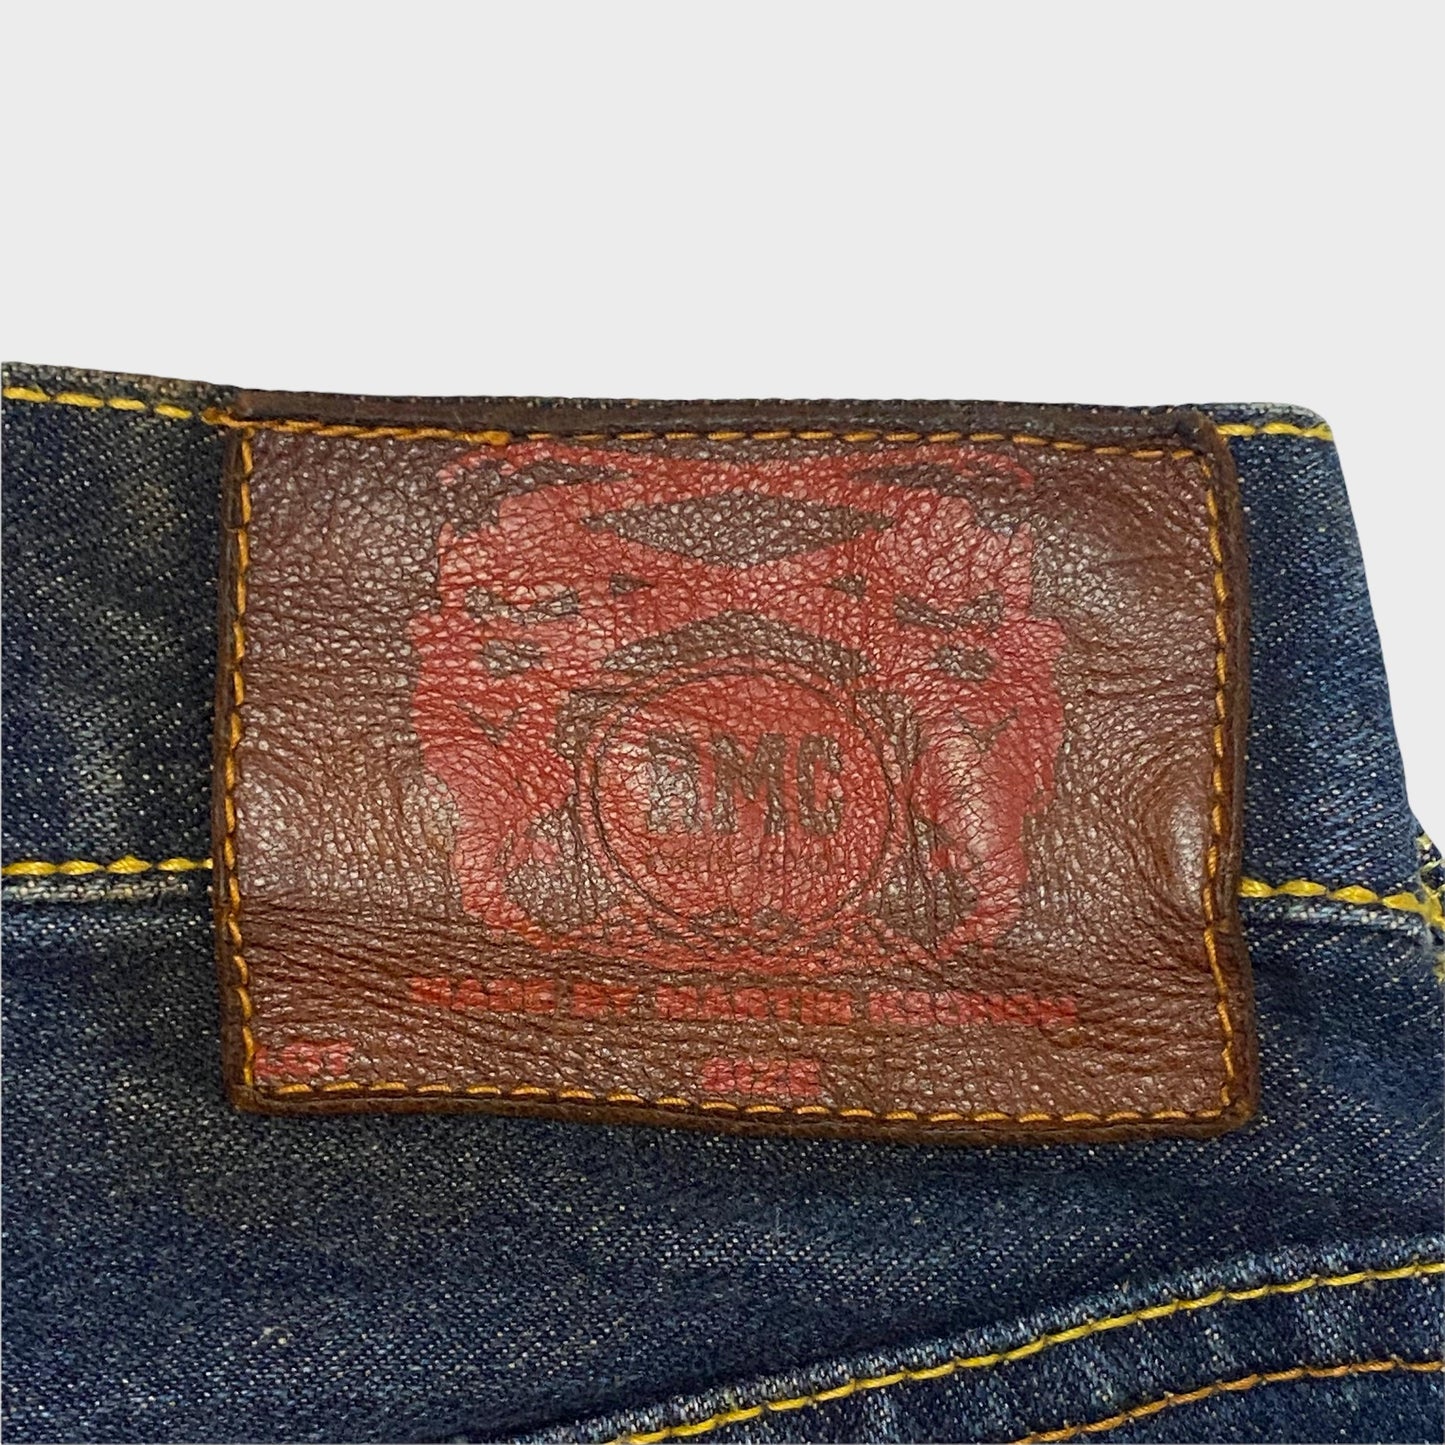 RMC 00’s Embroidered Denim Jeans - w28 - Known Source